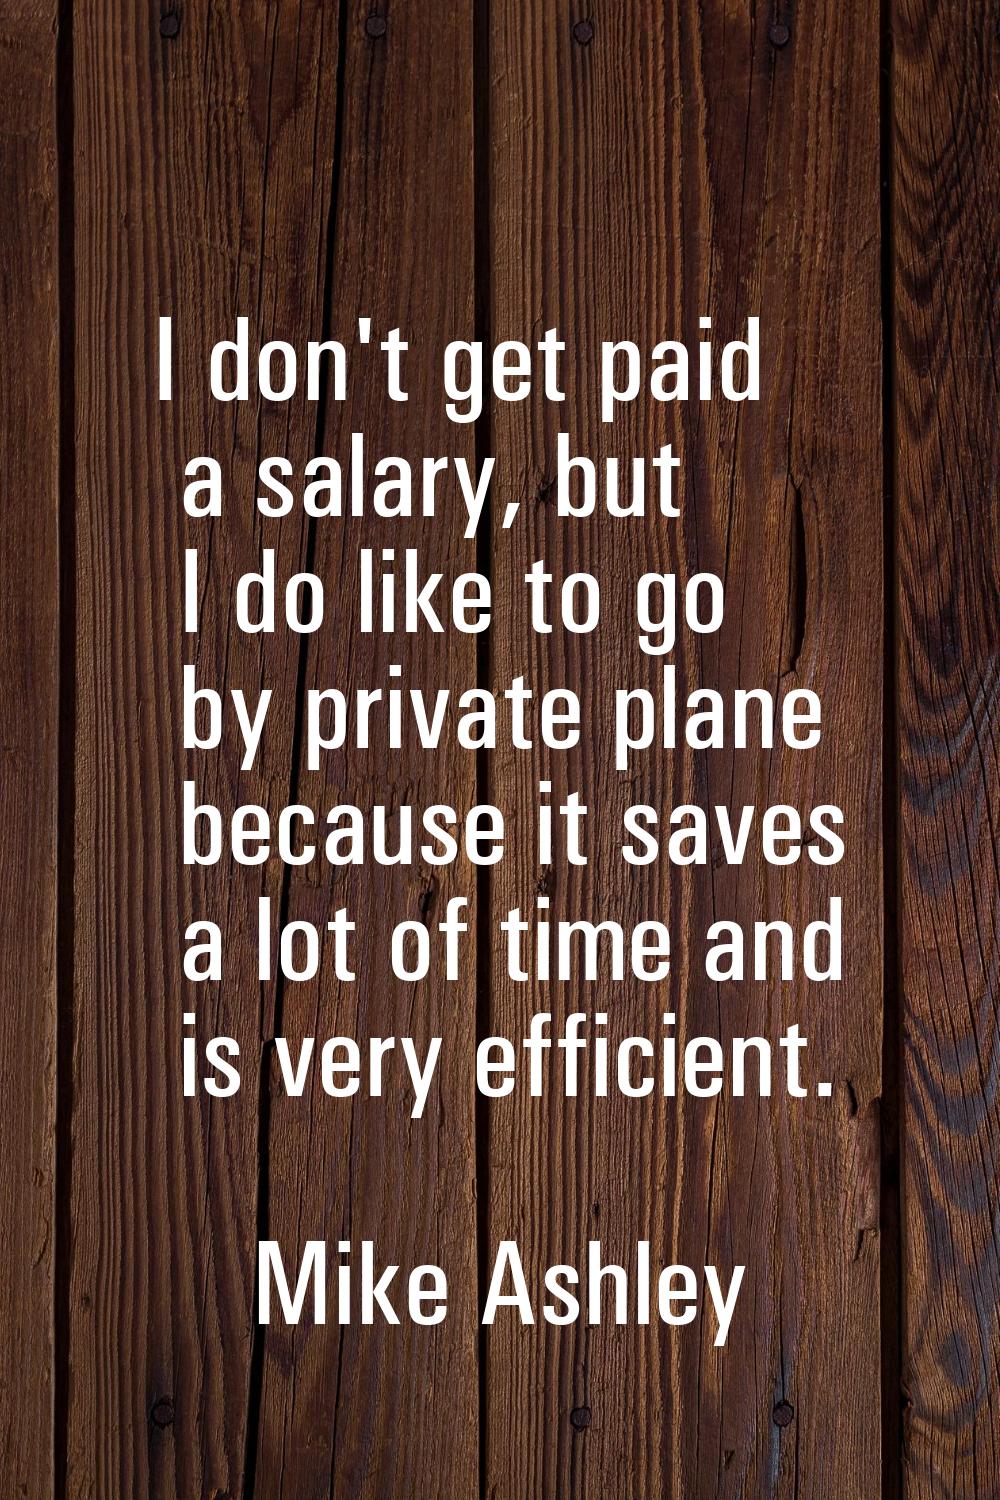 I don't get paid a salary, but I do like to go by private plane because it saves a lot of time and 